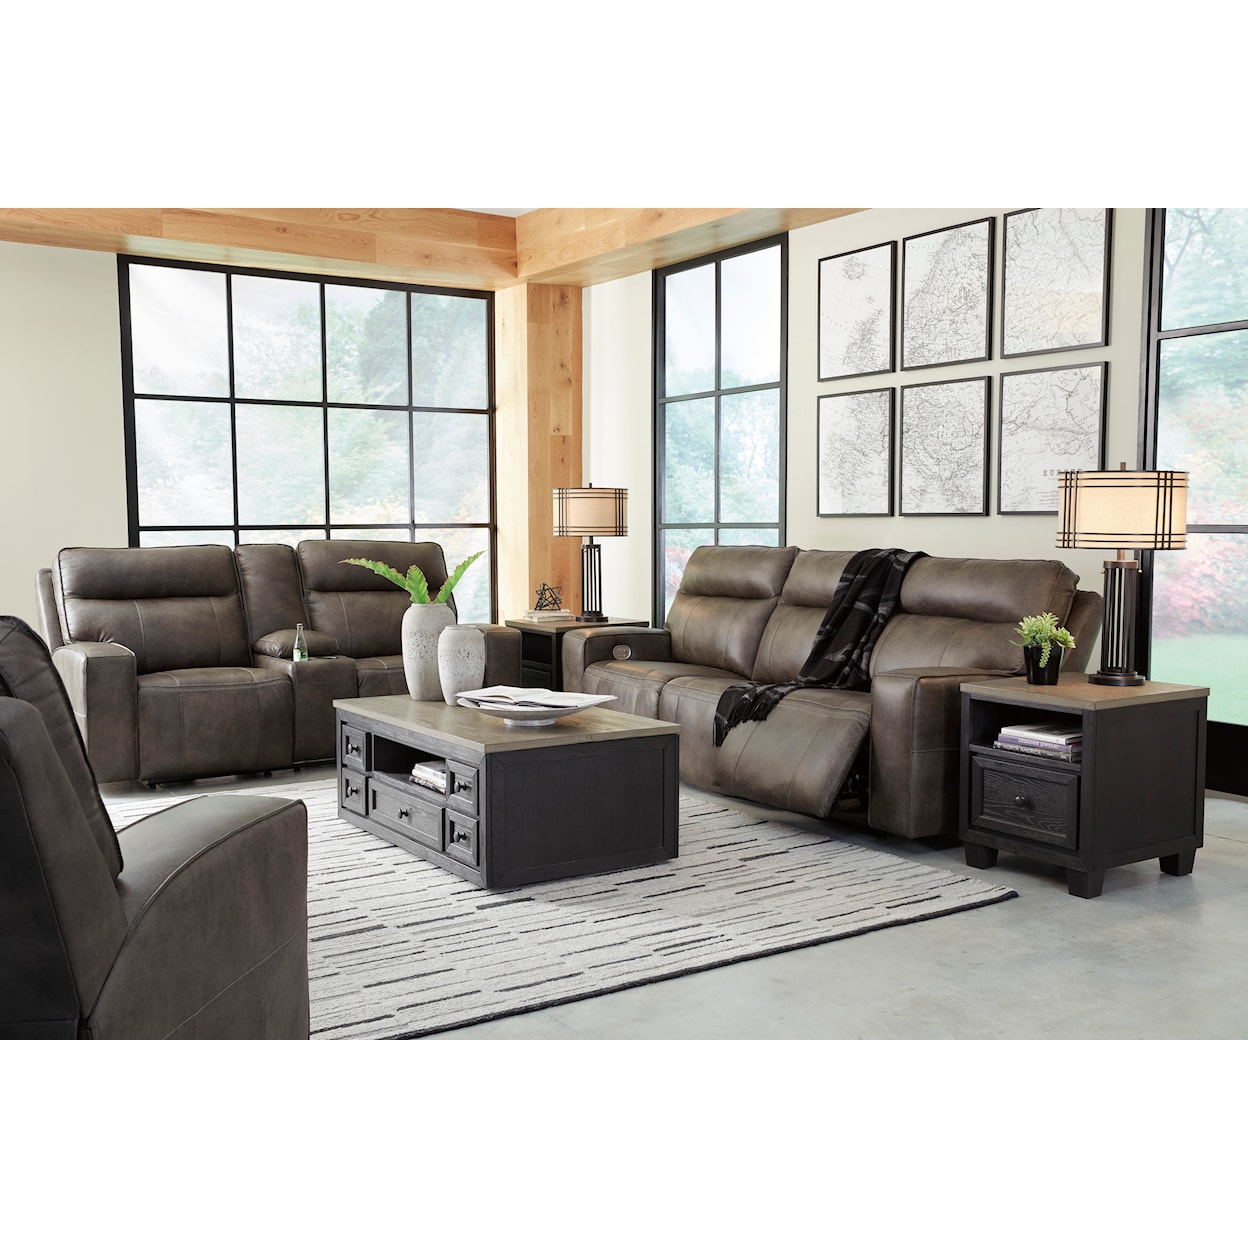 Signature Design by Ashley Game Plan Oversized Power Recliner